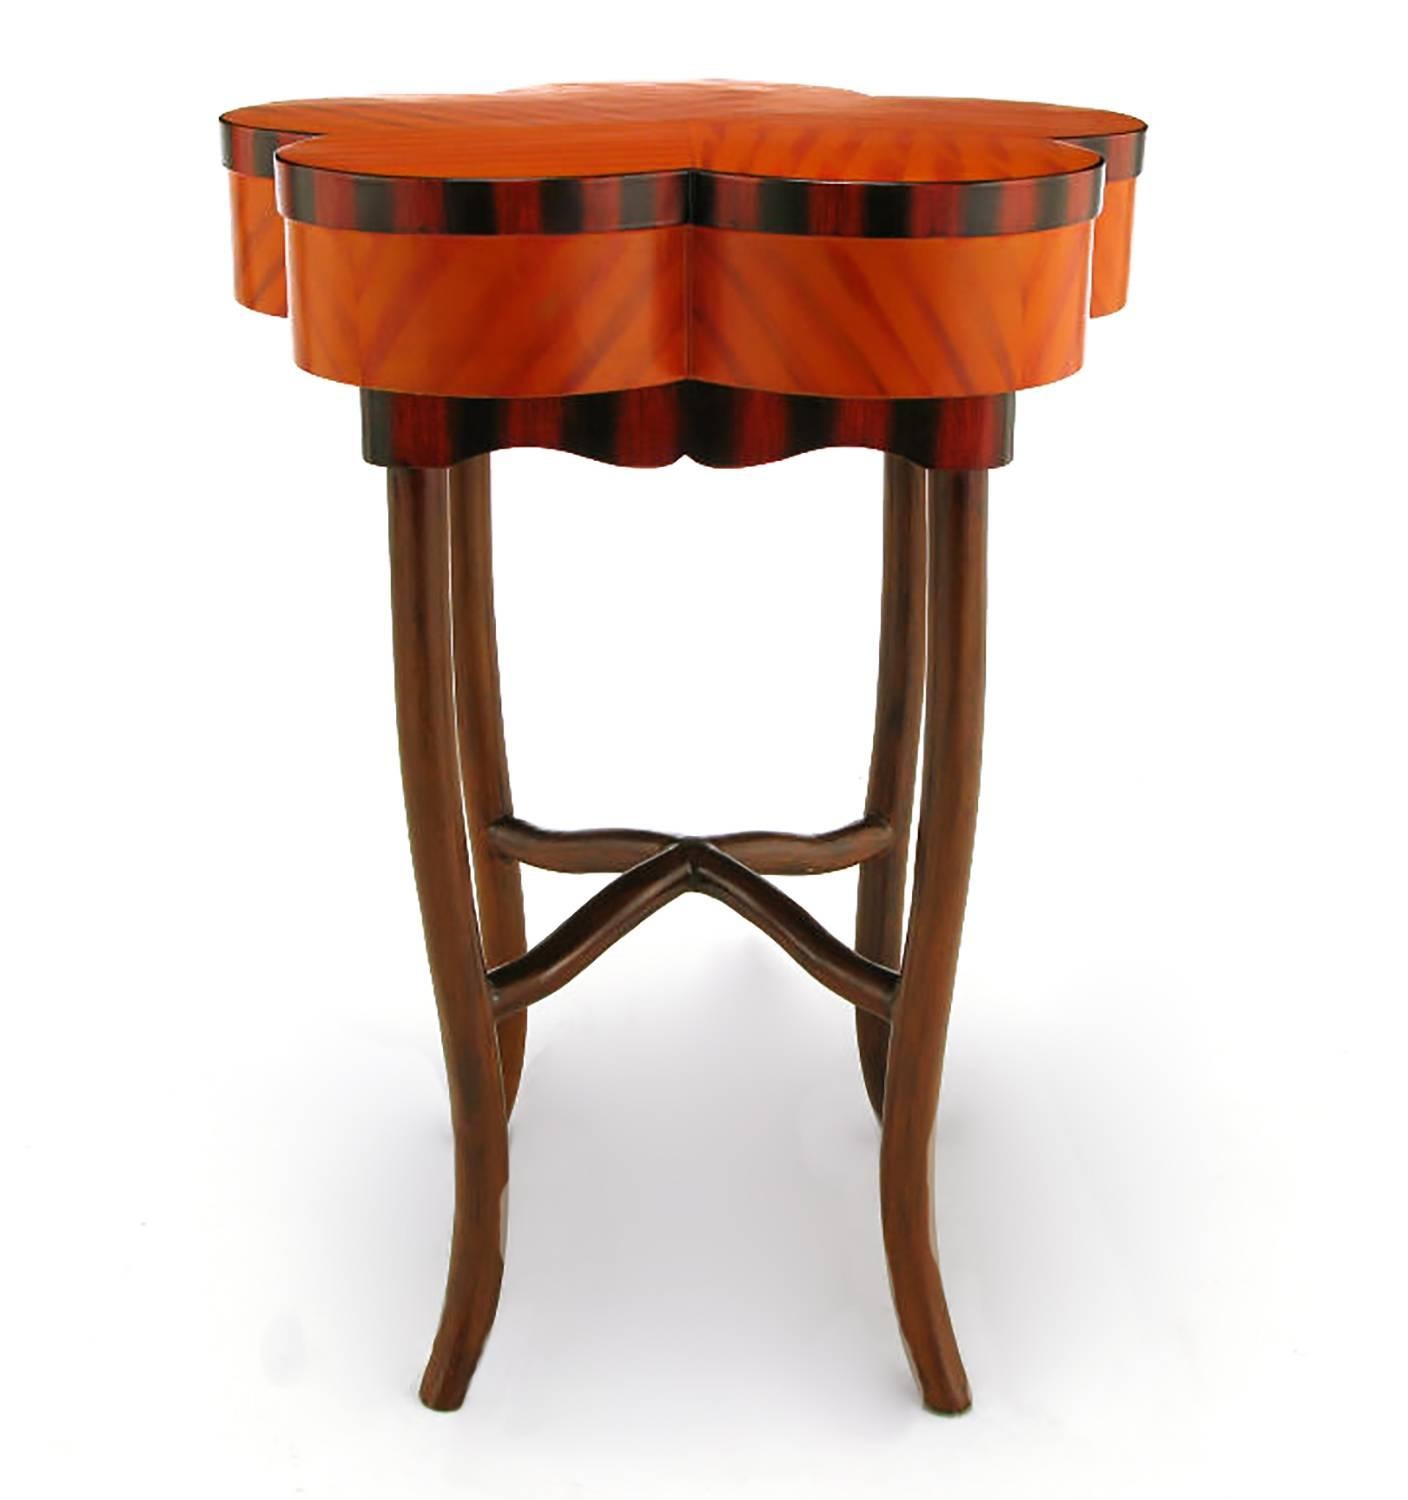 Faux bois side table in a pumpkin and crimson offset patterned pentafoil top with a scarlet and black scalloped skirt. Legs and pyramidal X stretcher are also lacquered to resemble walnut wood grain.